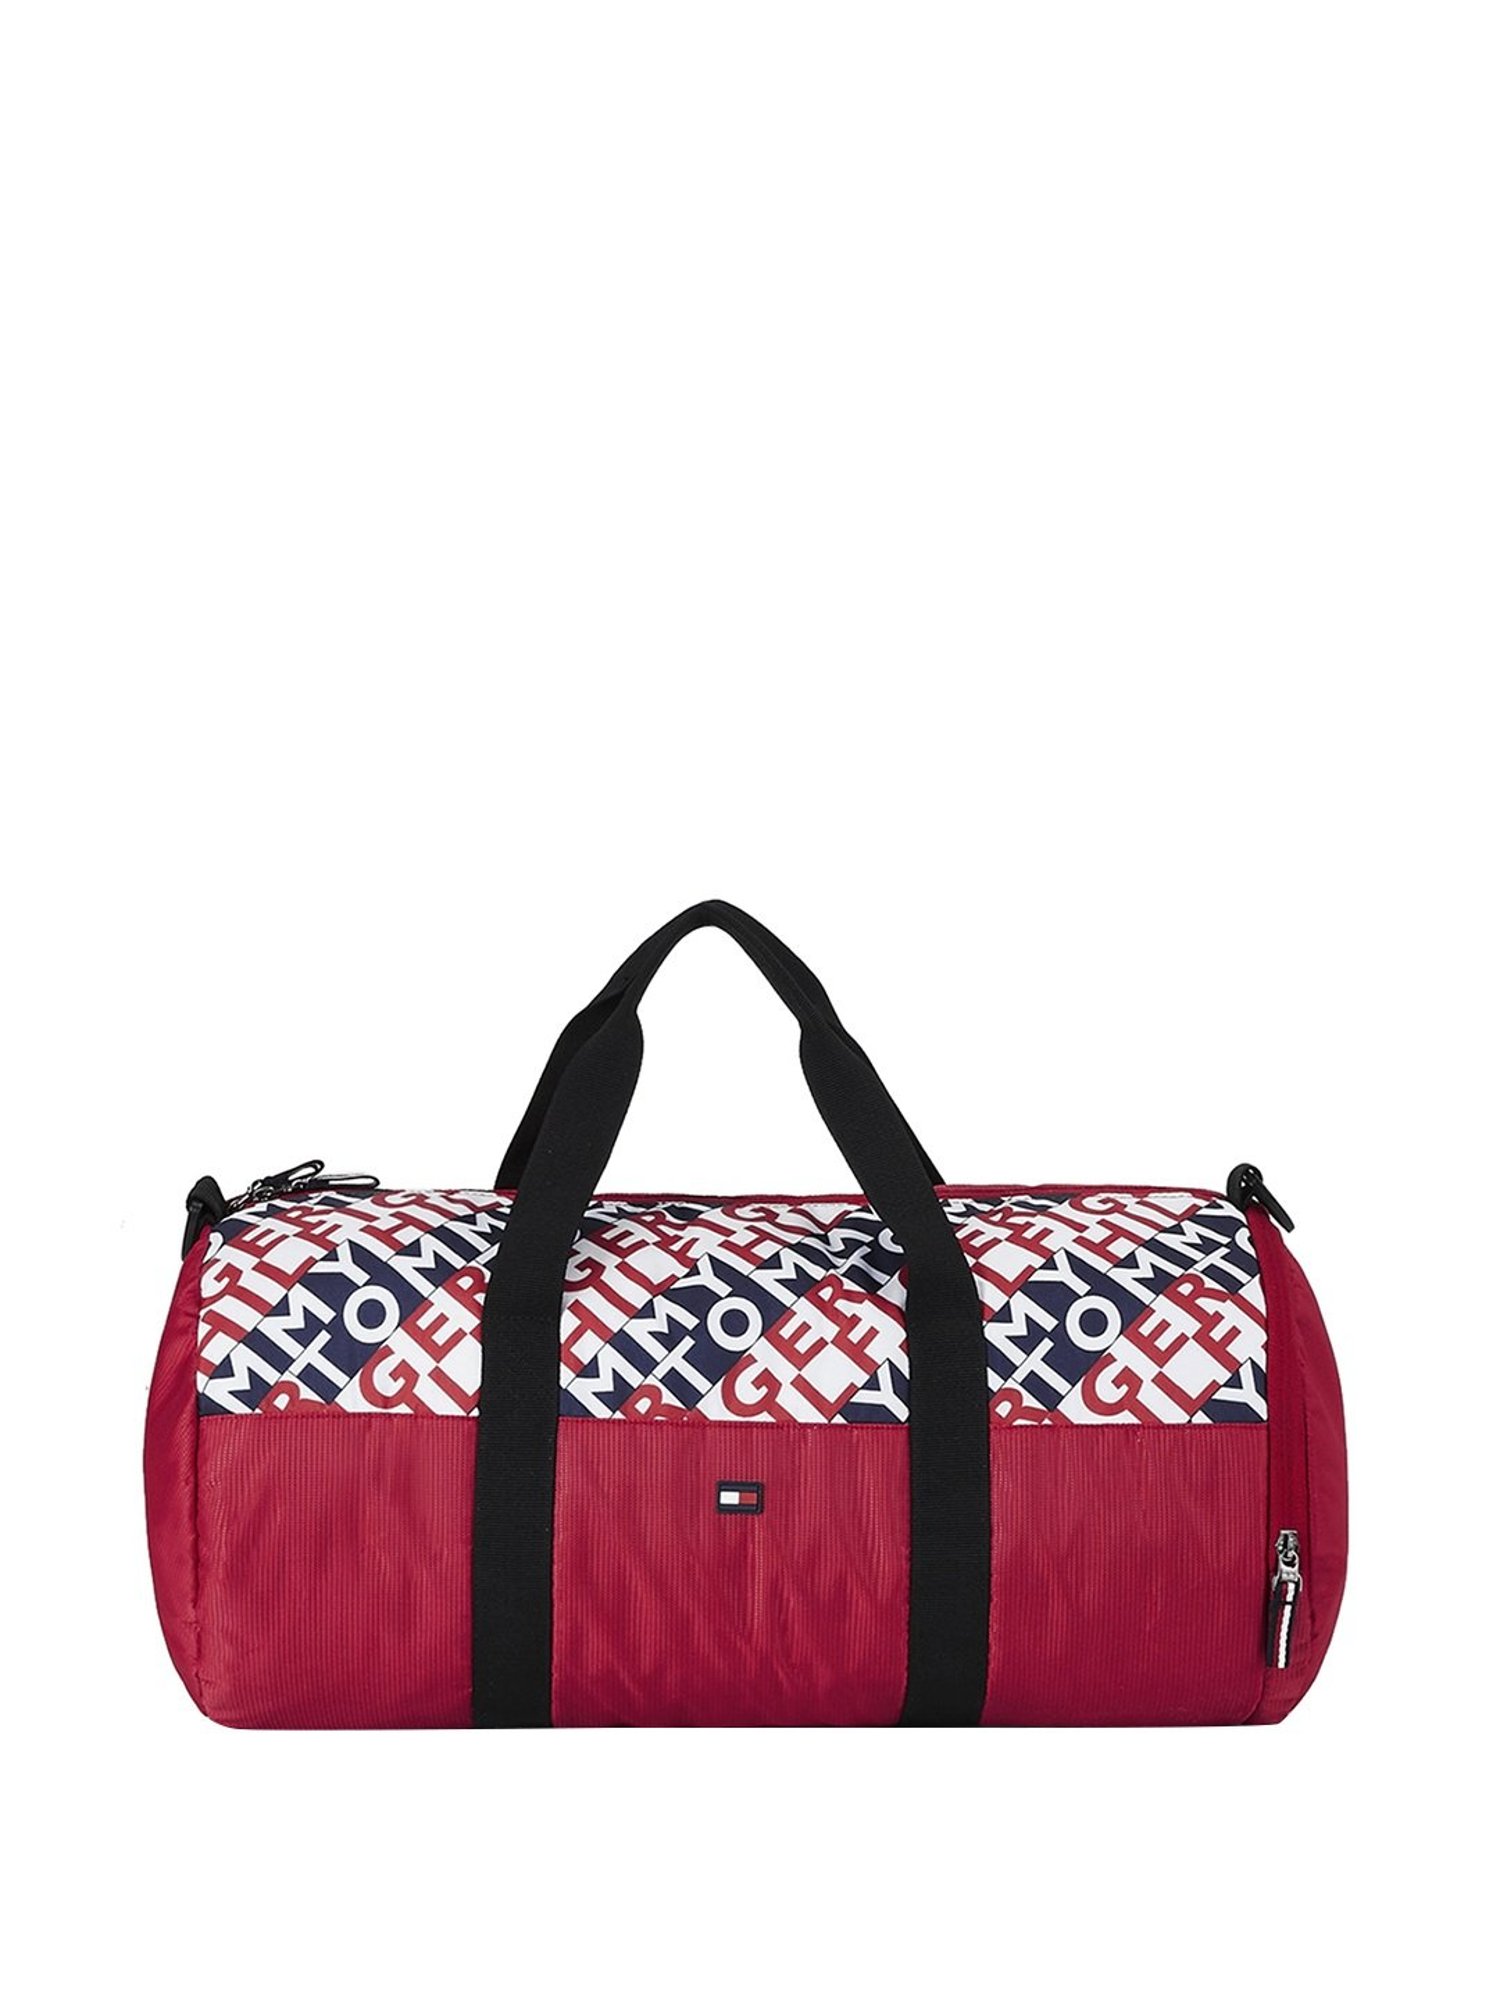 fest beviser rabat Buy Tommy Hilfiger Red Small Duffle Bag Online At Best Price @ Tata CLiQ